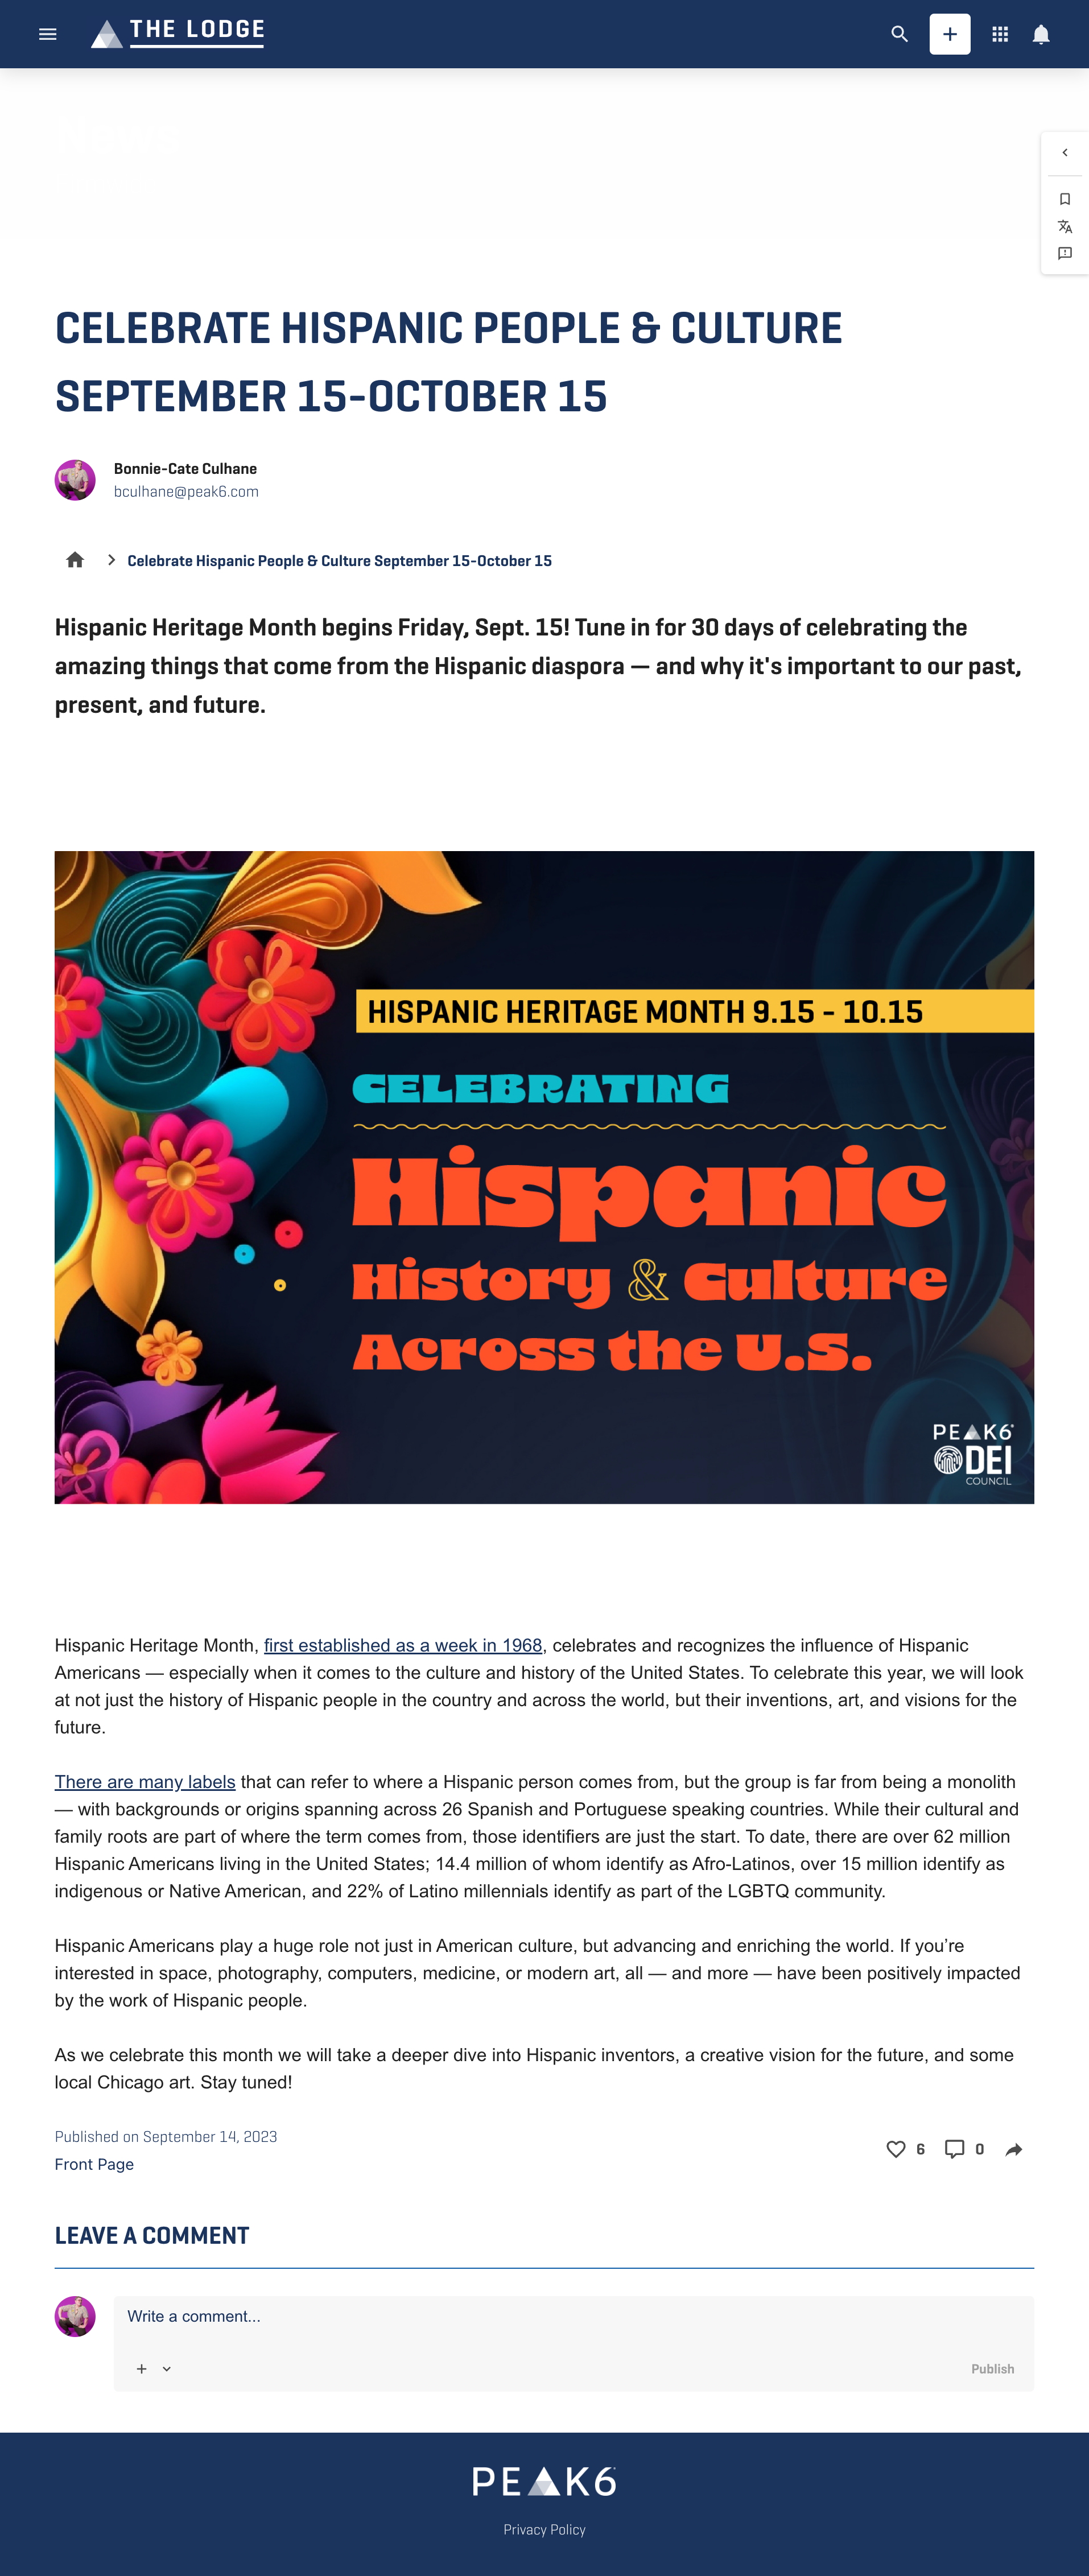 thelodge.peak6.com_home_ls_content_6011980639895552_celebrate-hispanic-people-culture-september-15-october-15.png